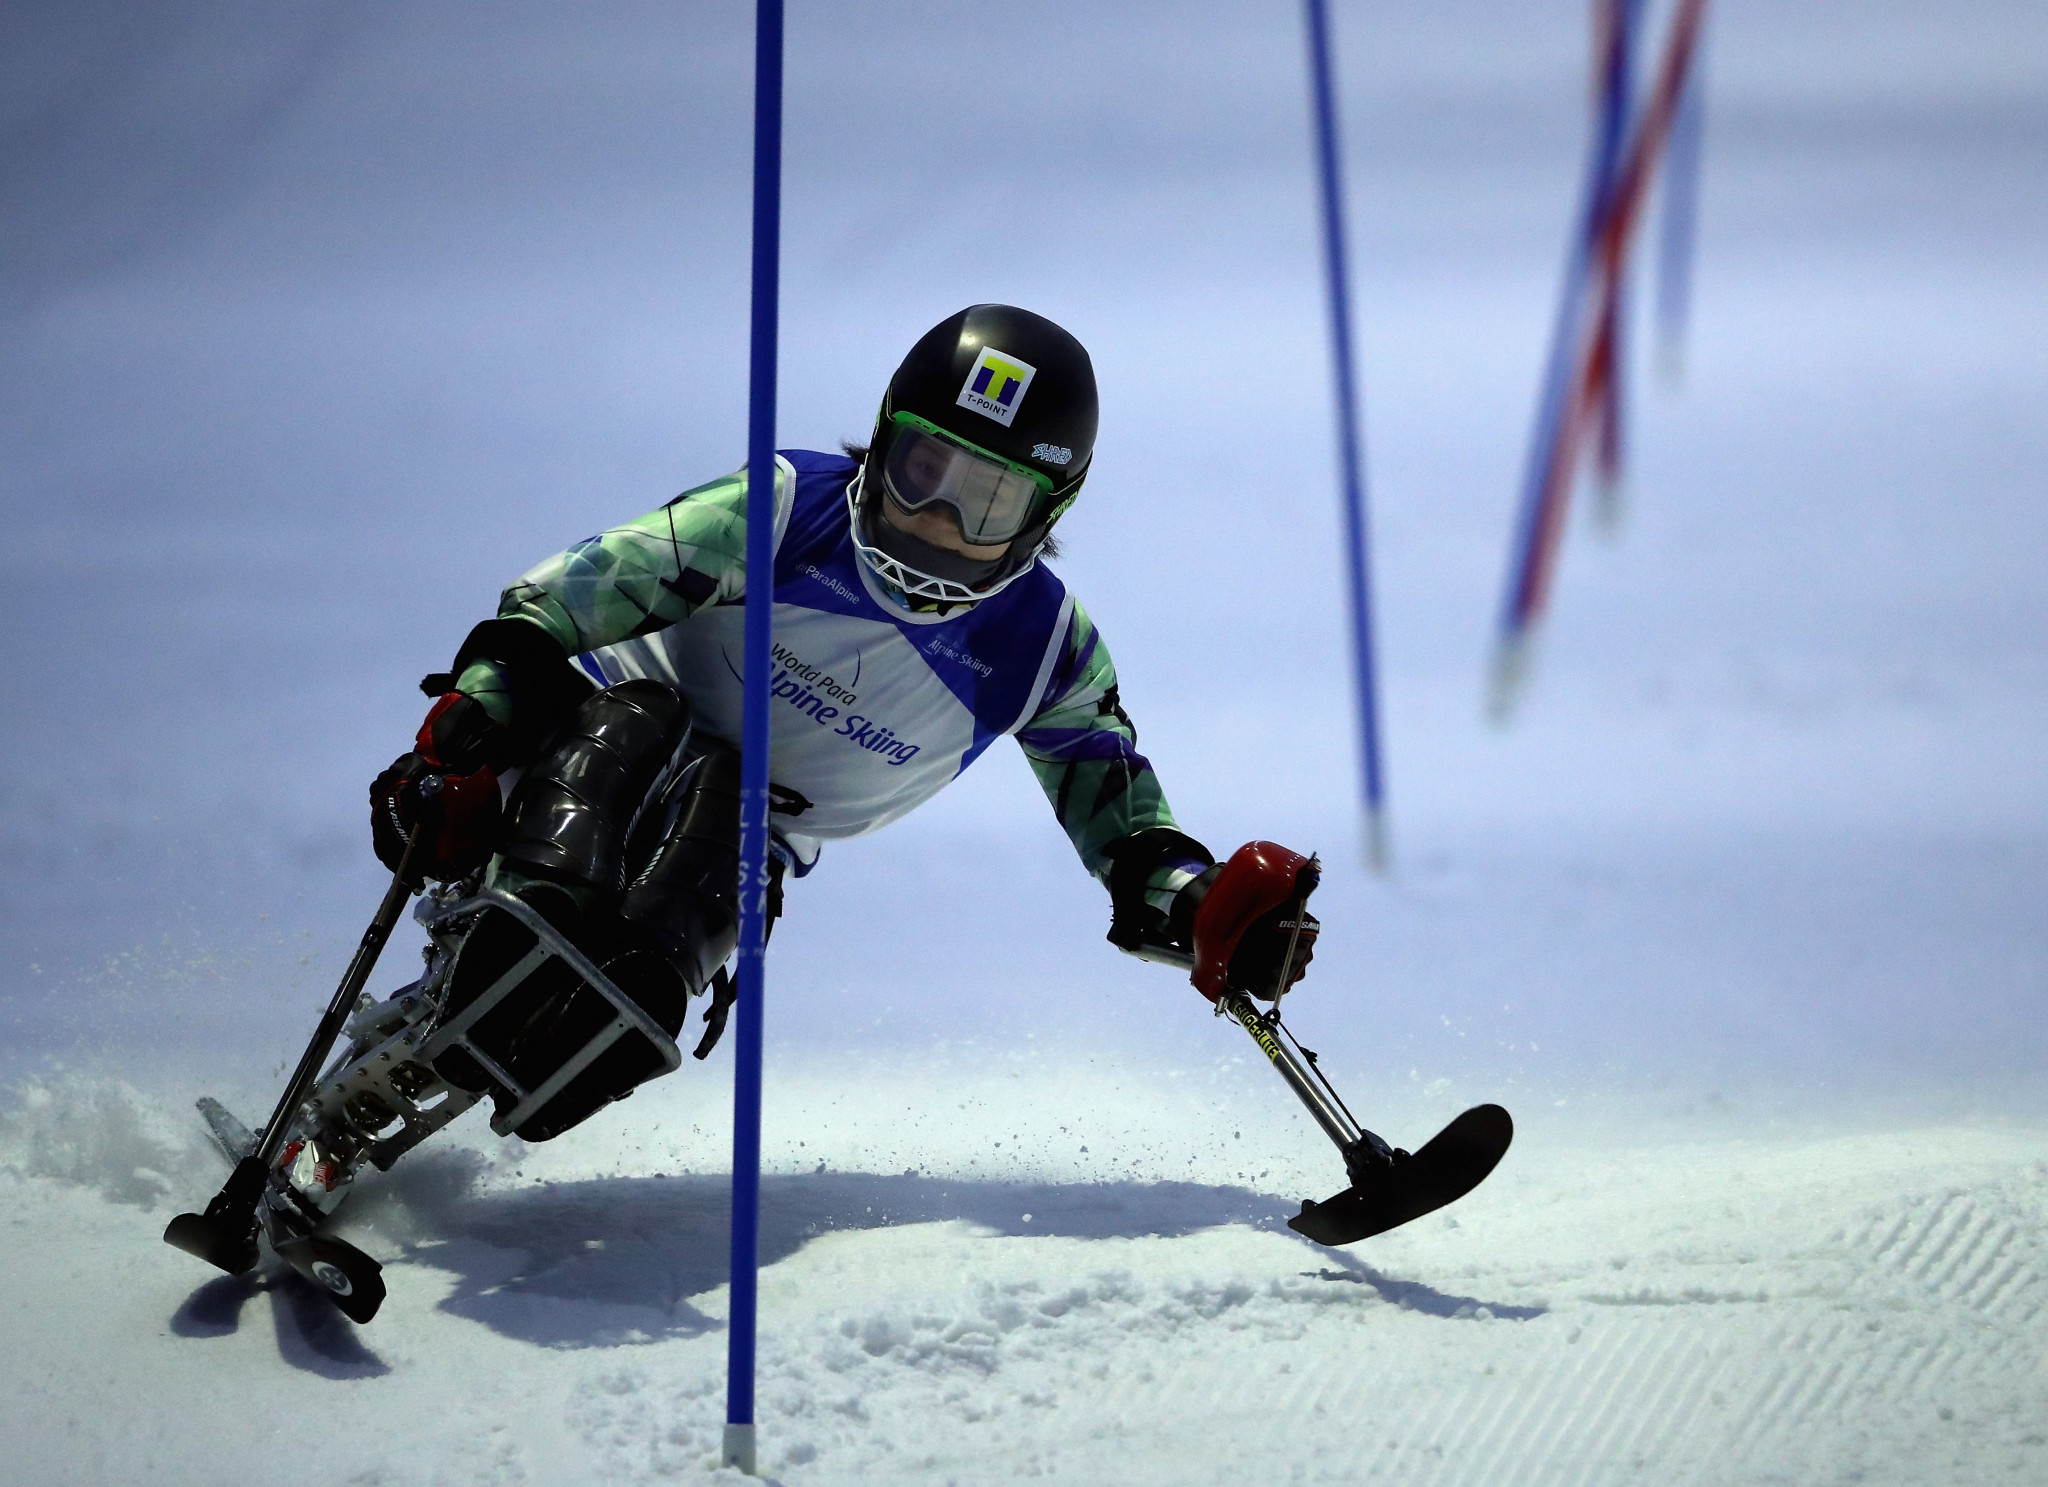 Skiers ready for Para Alpine Skiing World Cup in Zagreb prior to World Championships